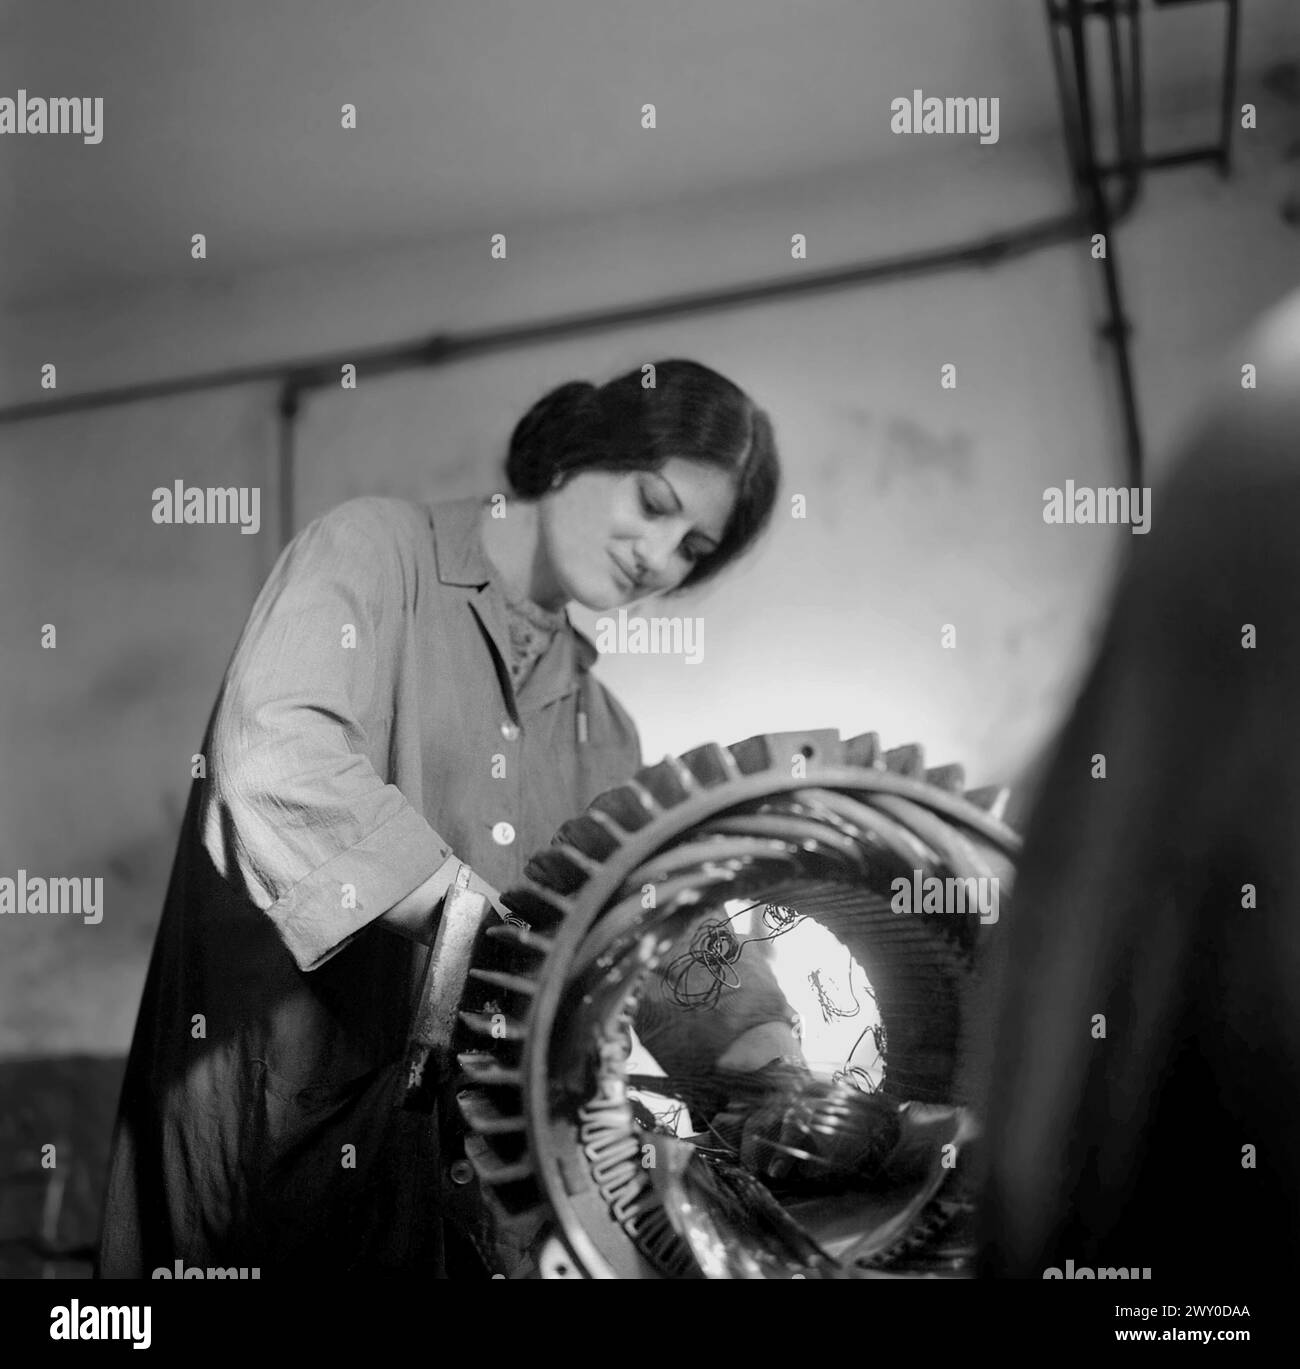 Socialist Republic of Romania in the 1970s. Woman working in a state owned factory. Stock Photo